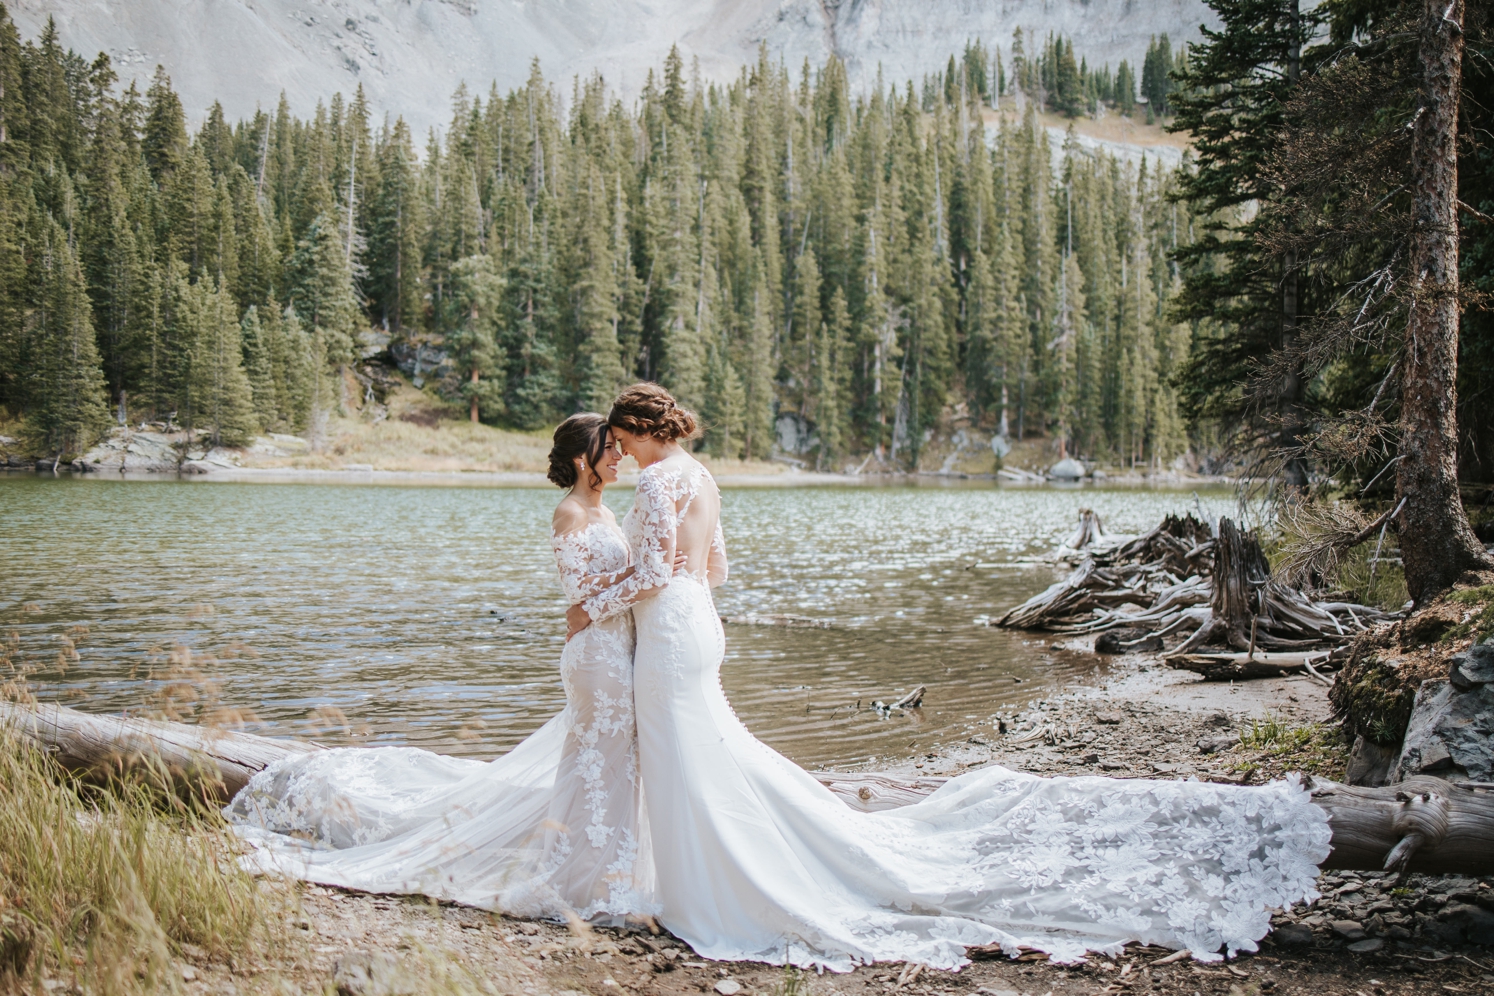 Brides facing each other and standing next to lake at Telluride wedding | McArthur Weddings and Events